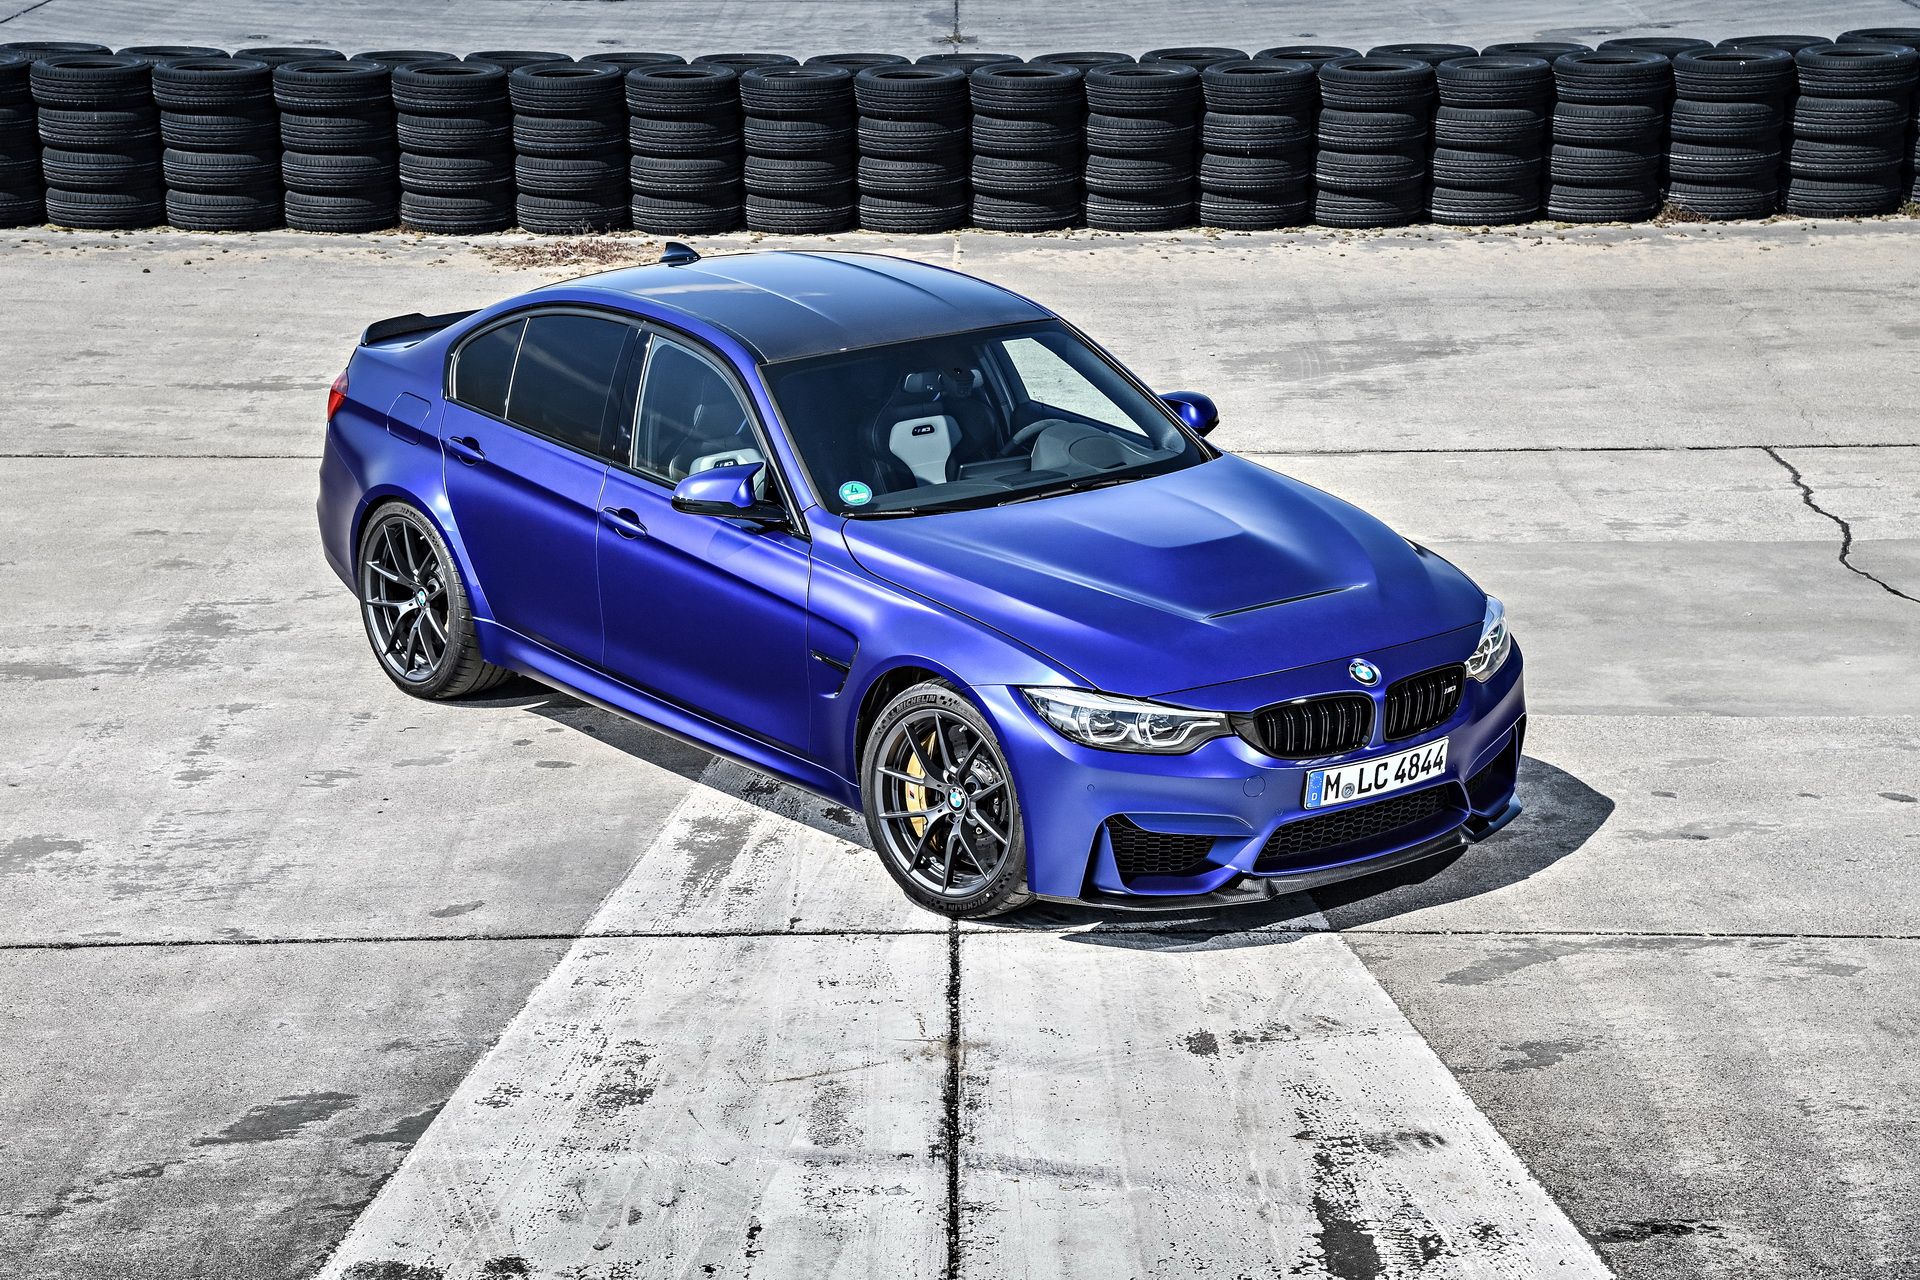 BMW M3 CS Launches in Europe with Amazing Media Gallery